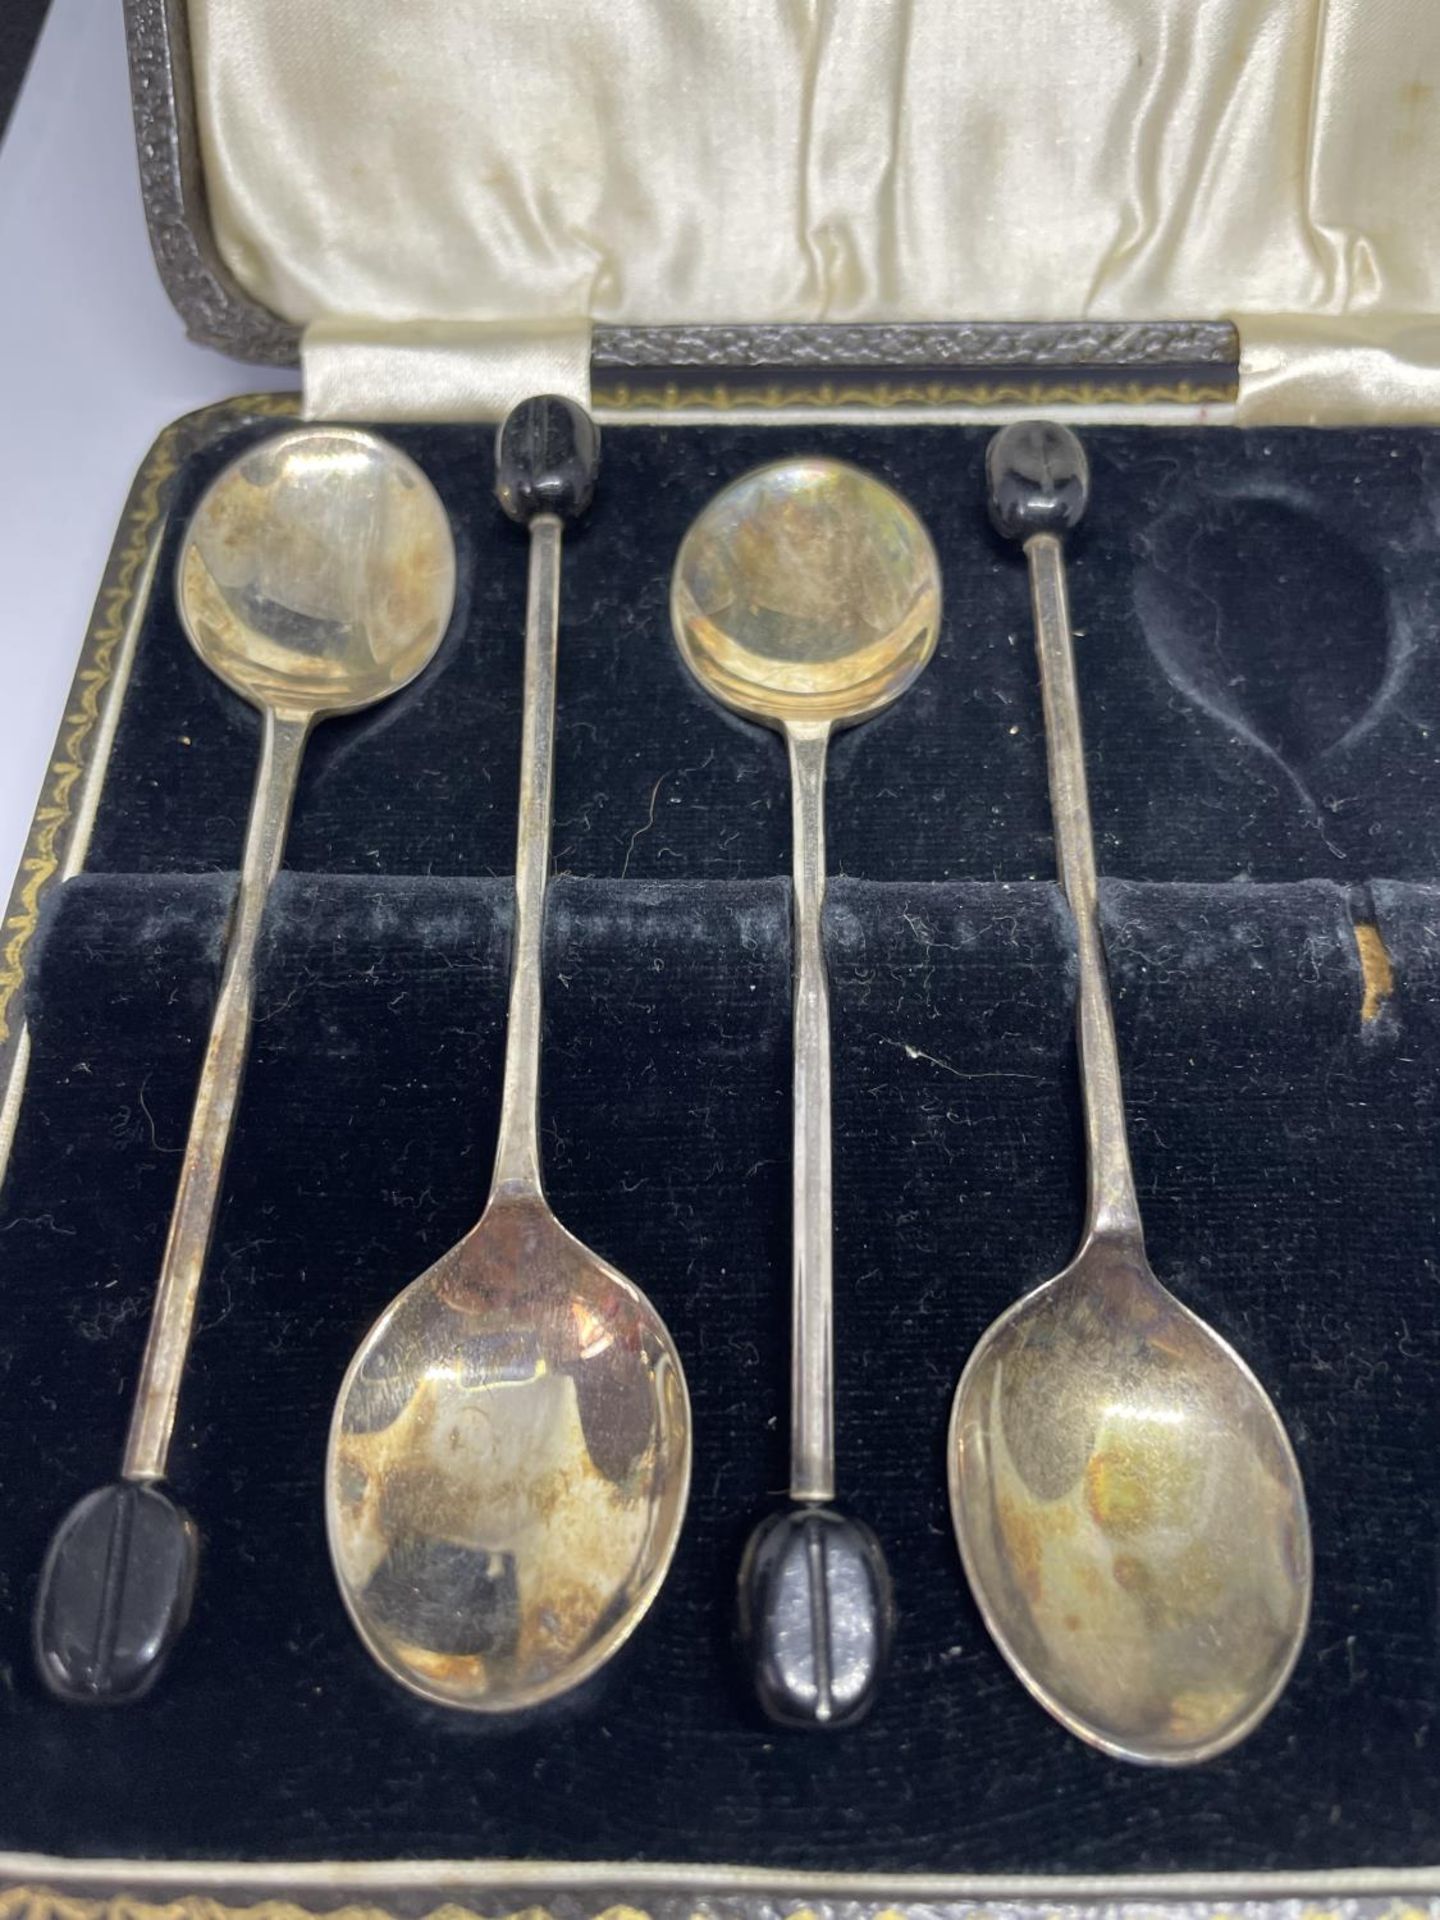 FOUR HALLMARKED SHEFFIELD SILVER COFFEE BEAN SPOONS IN A PRESENTATION BOX - Image 2 of 3